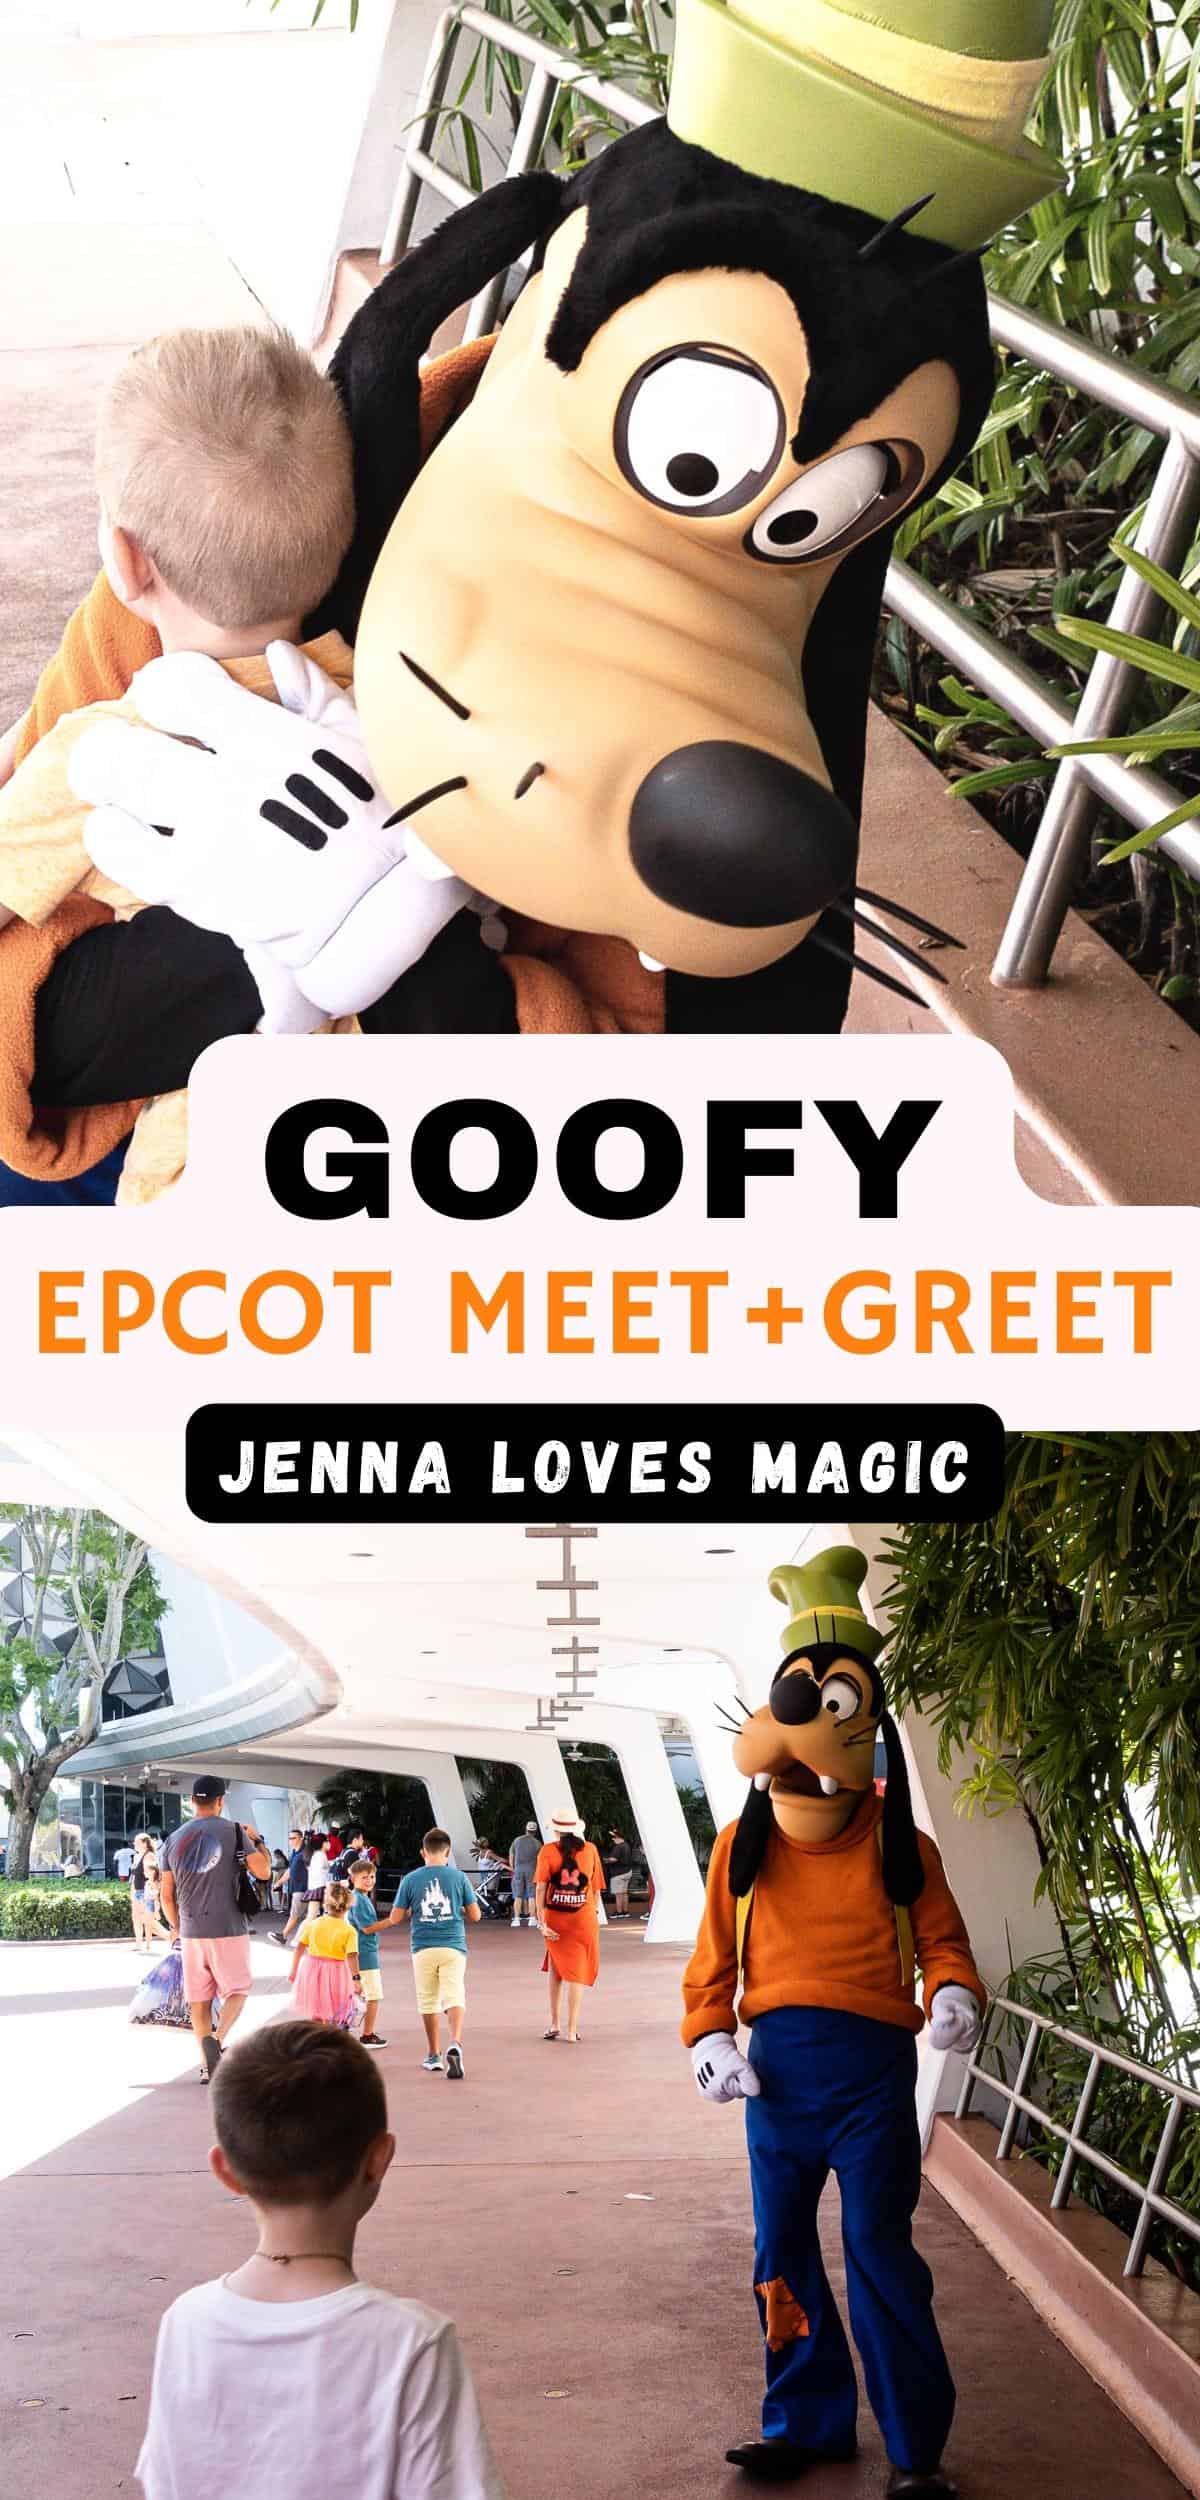 Goofy character meet and greet photos in Epcot Disney World theme park with text overlay and Jenna Loves Magic logo